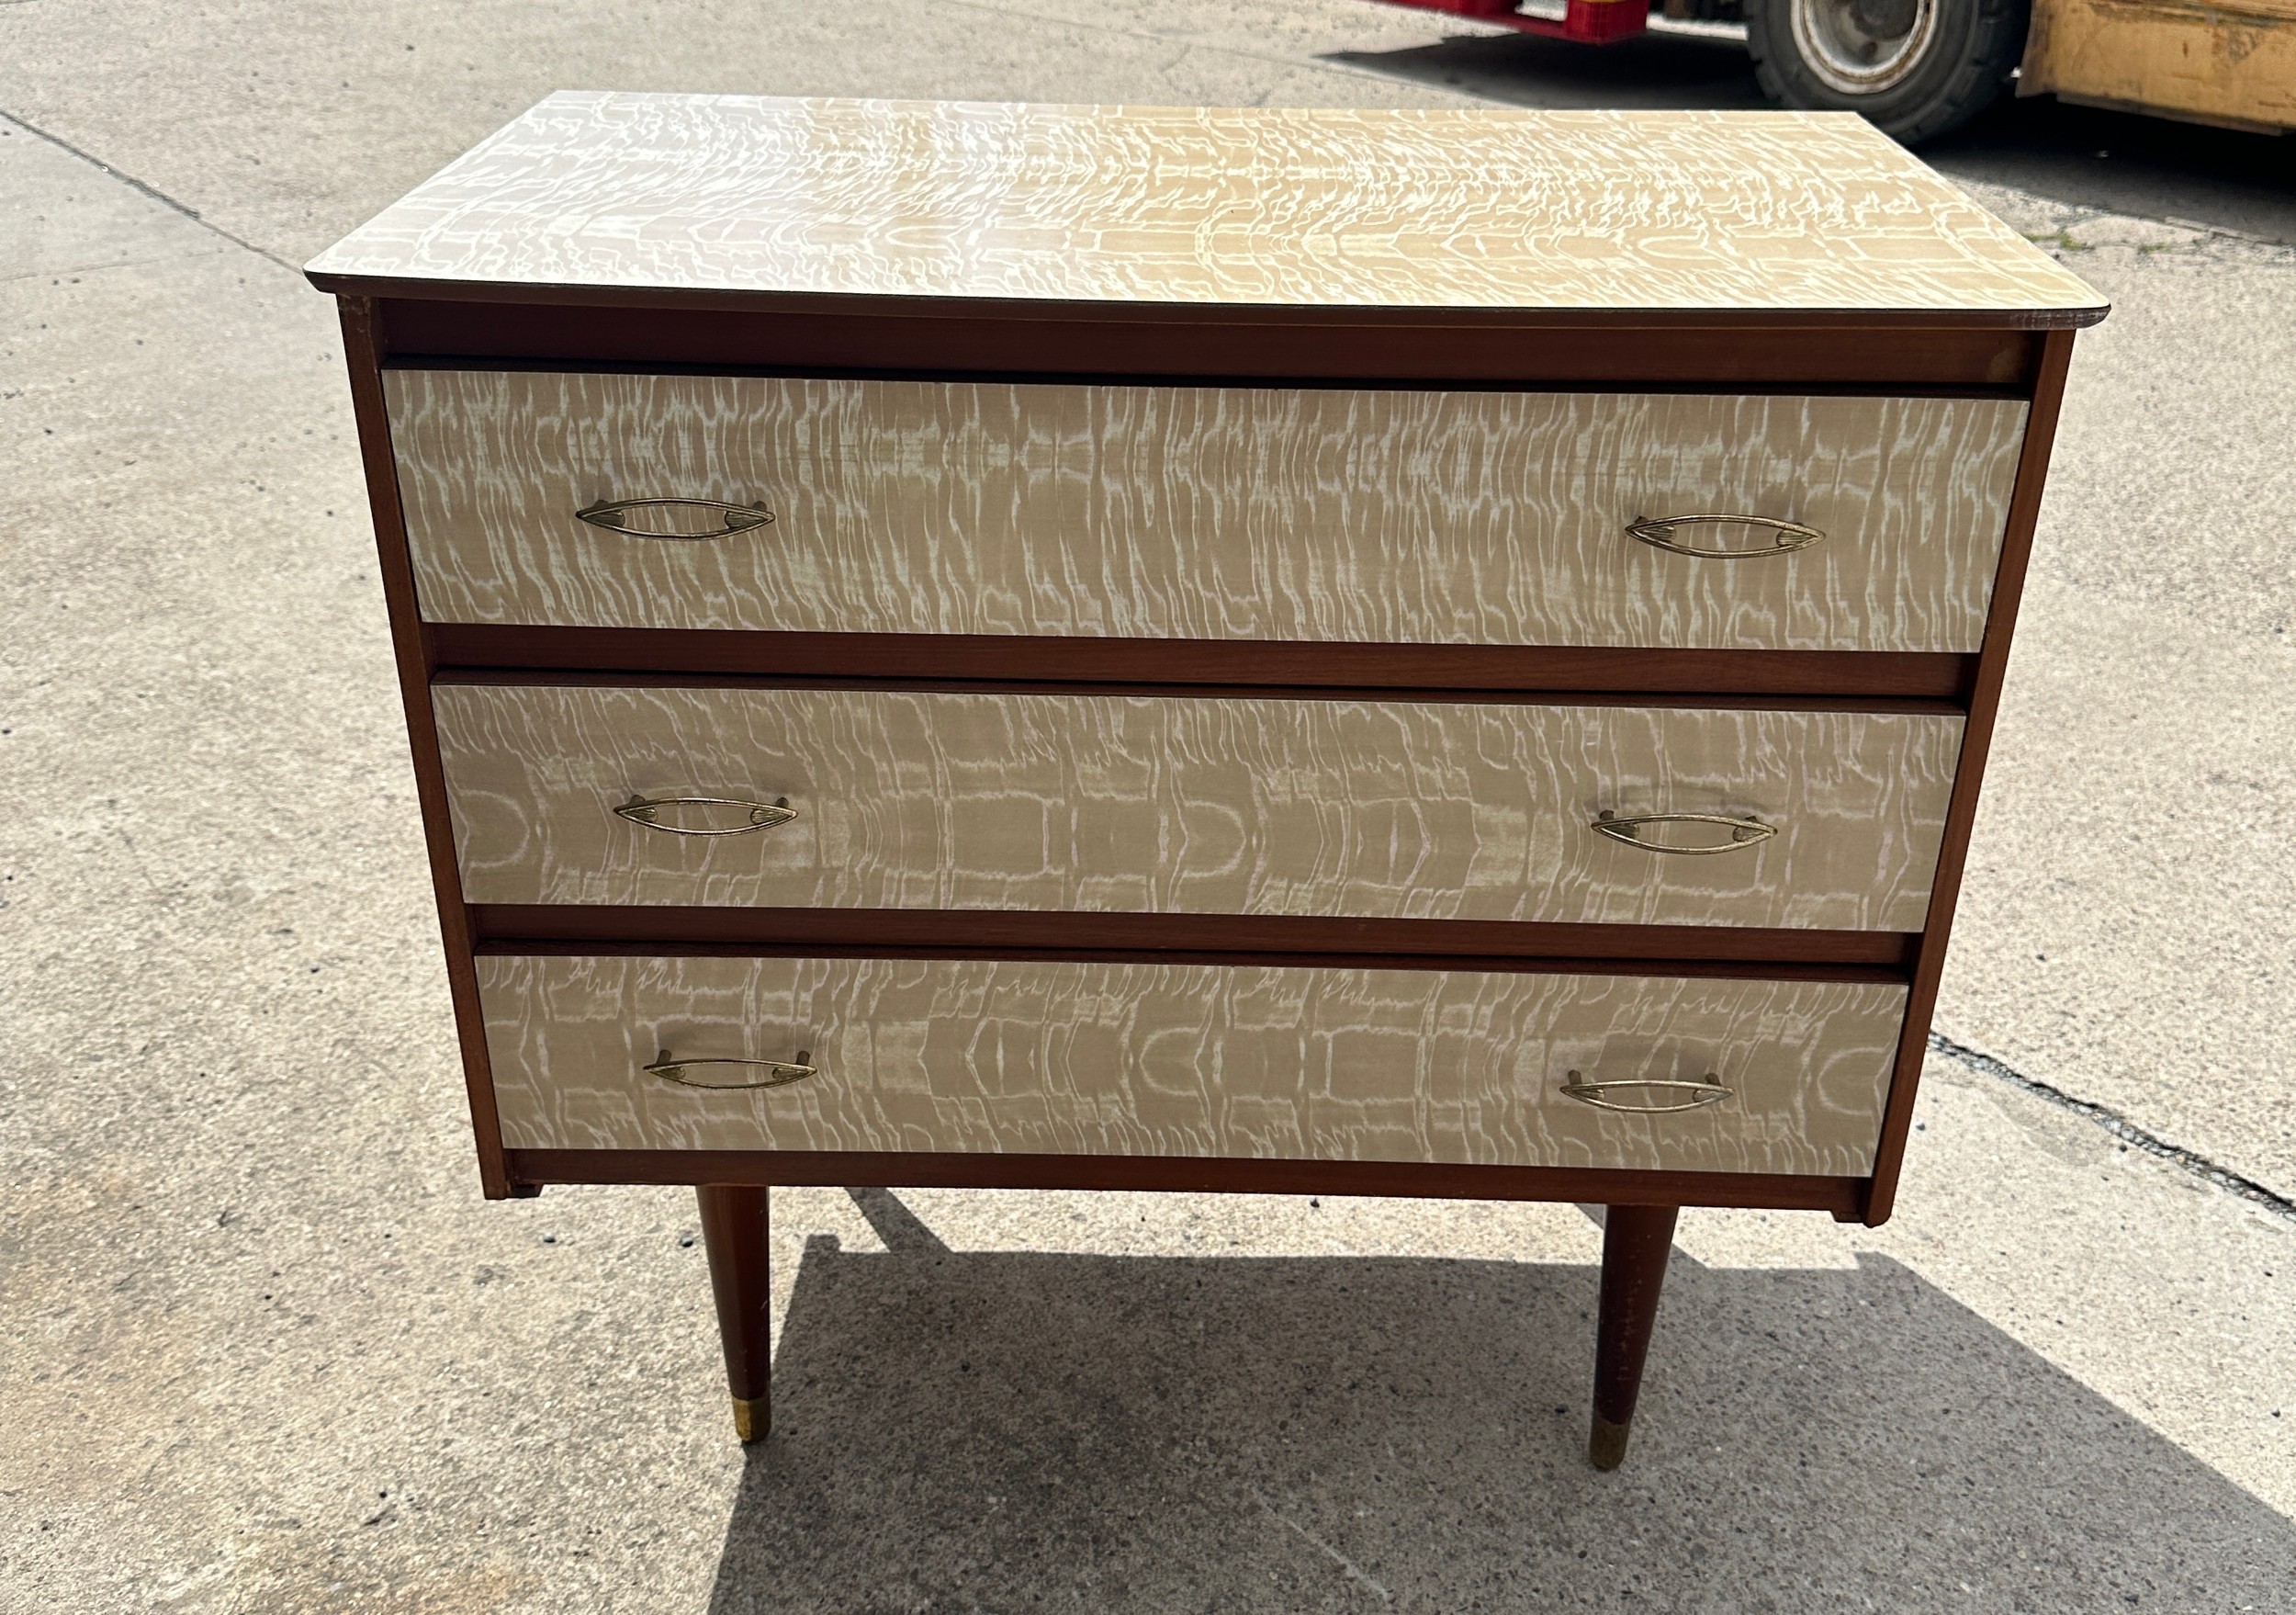 60's melamine three drawer chest of drawers measures approx 30 inches wide by 28 inches tall - Image 3 of 3